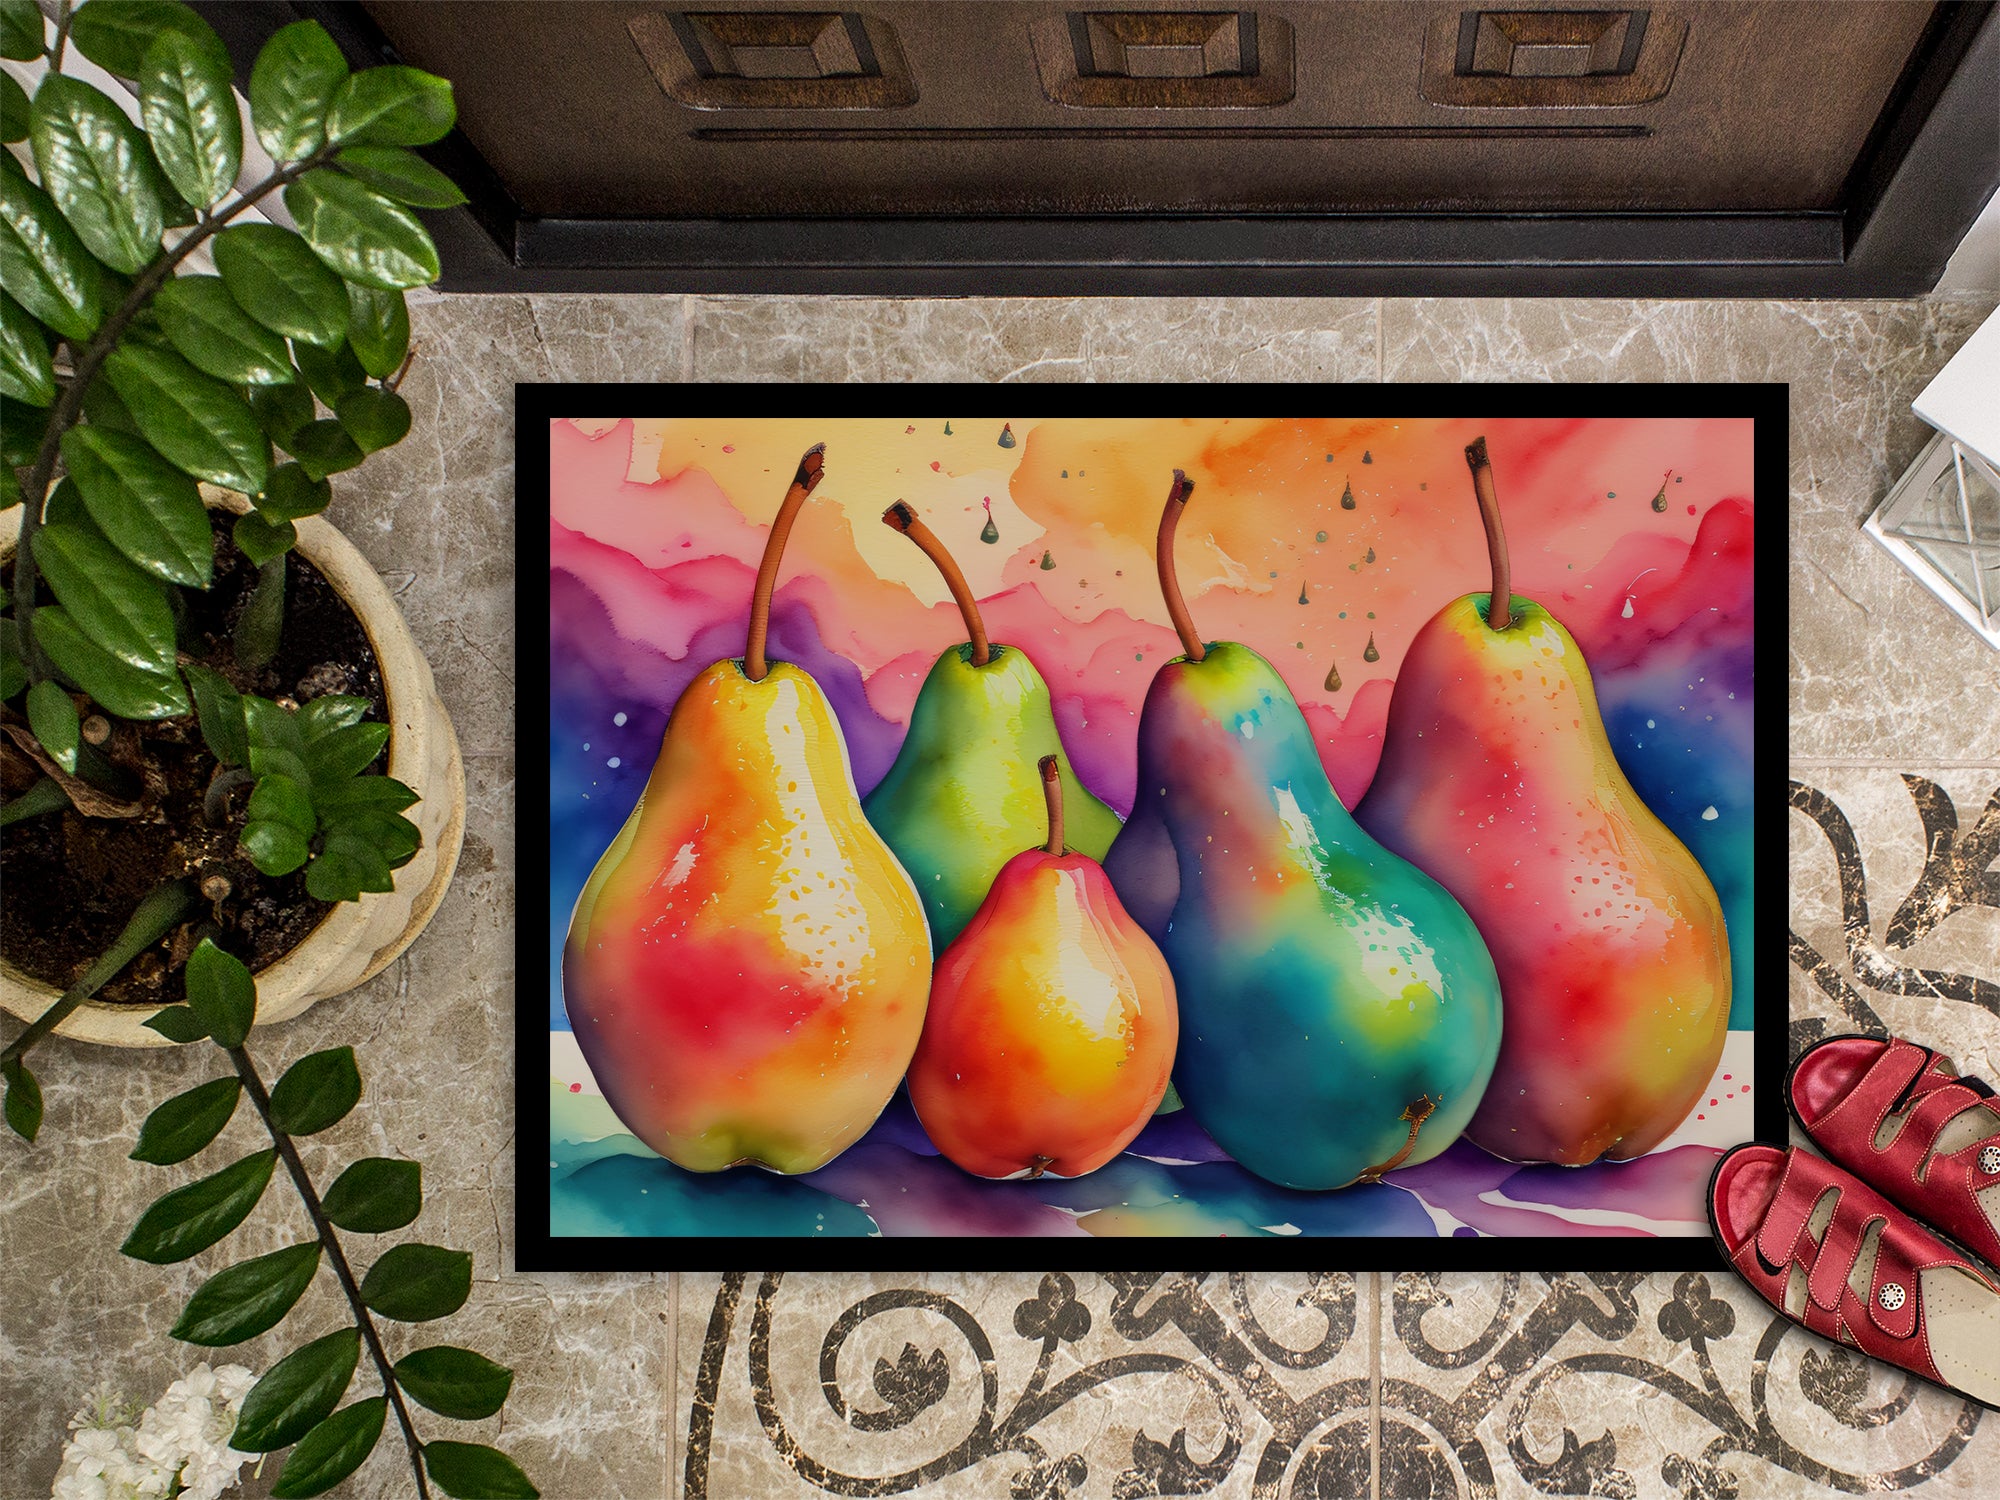 Colorful Pears Doormat 18x27